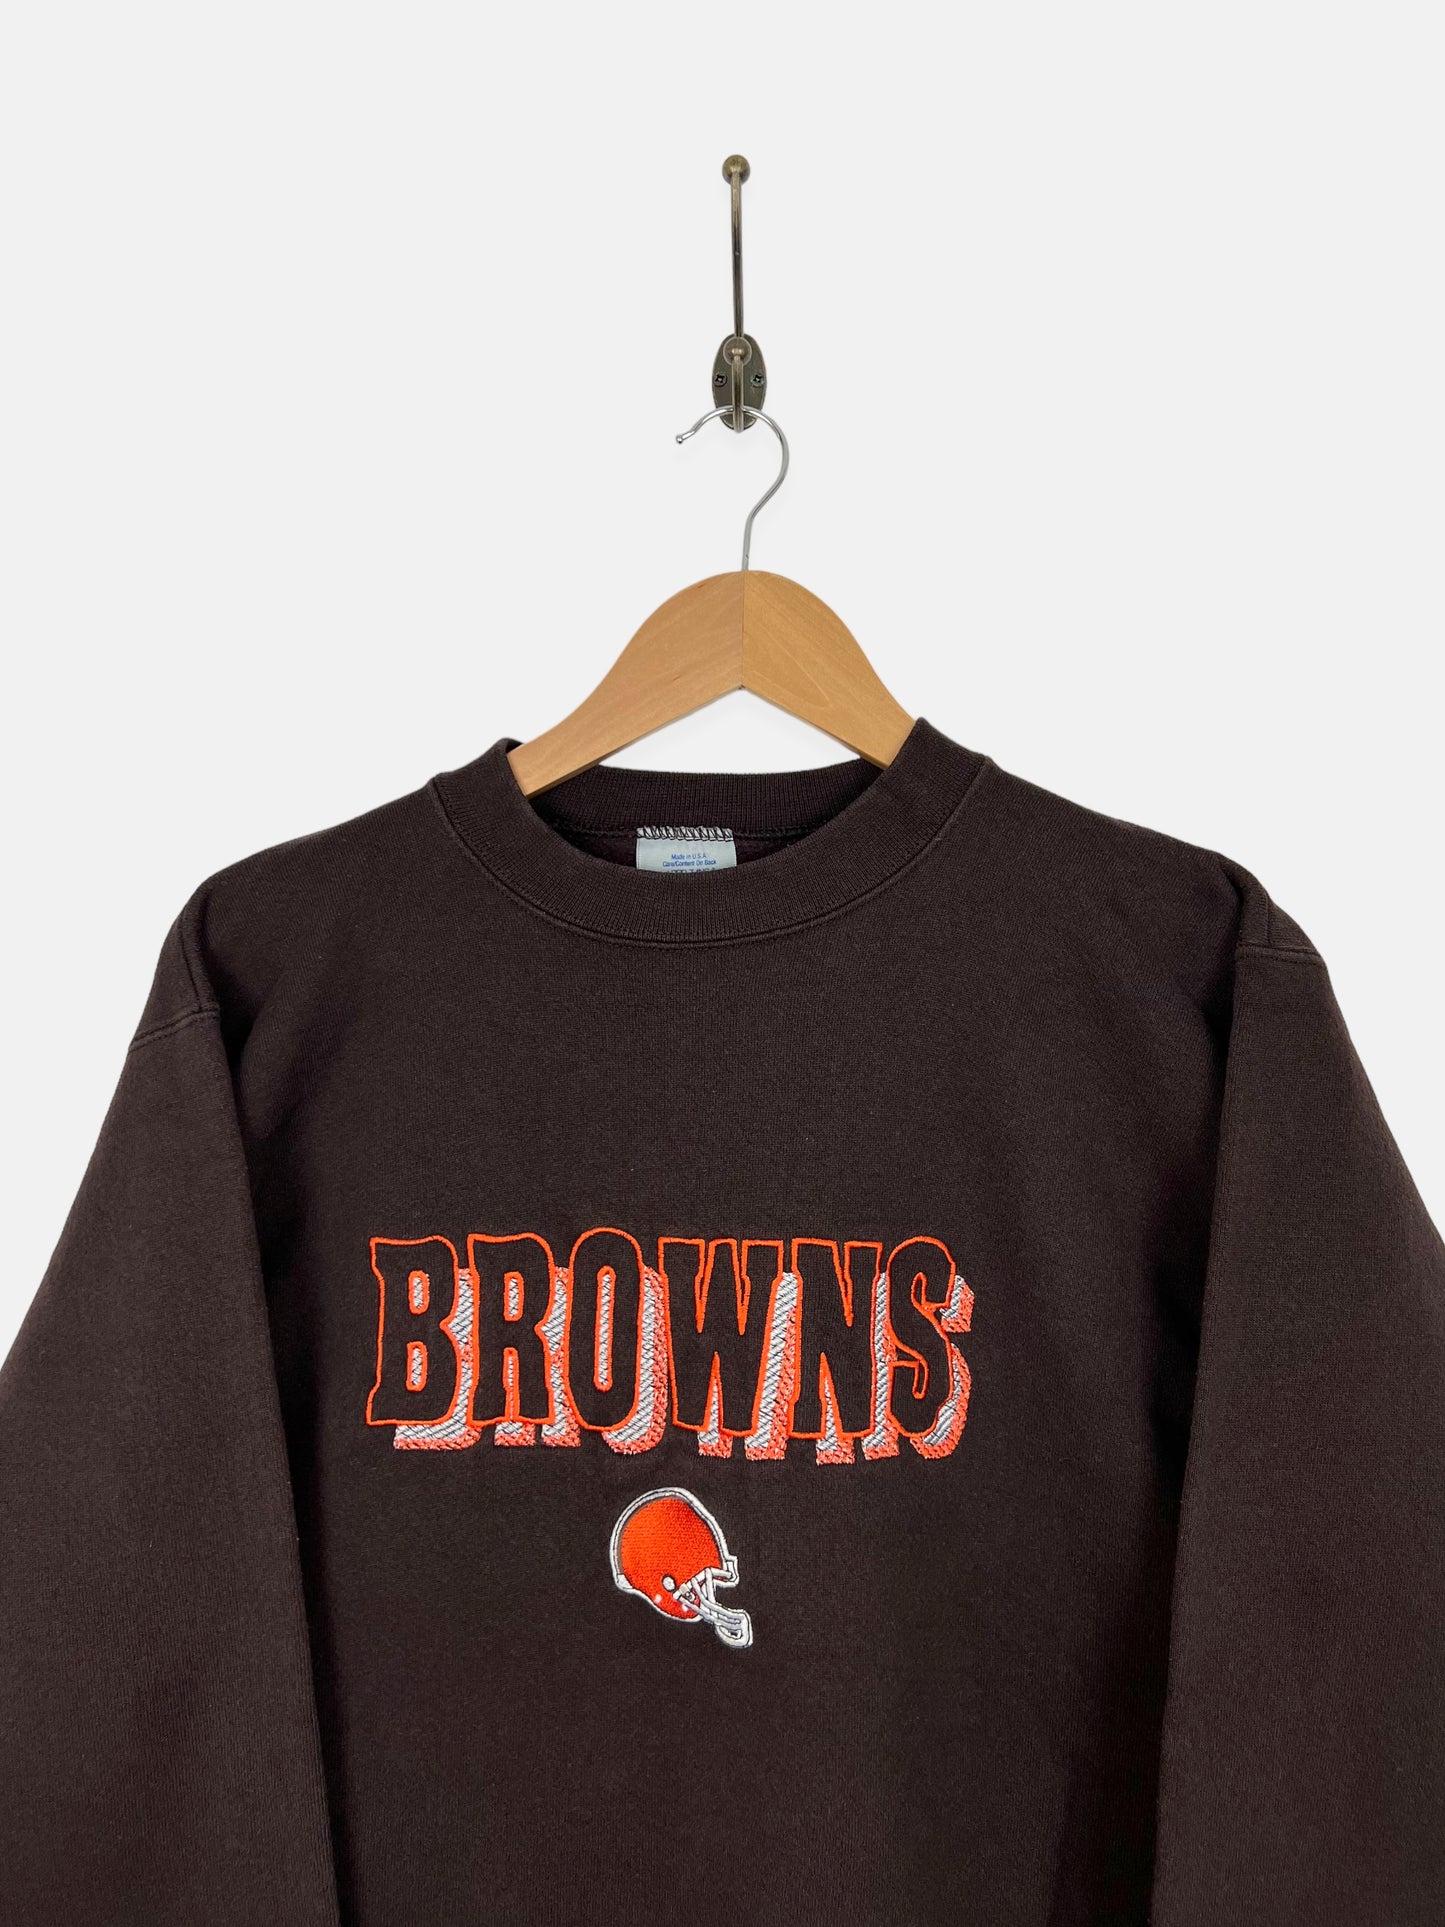 90's Cleveland Browns NFL USA Made Embroidered Vintage Sweatshirt Size 6-8